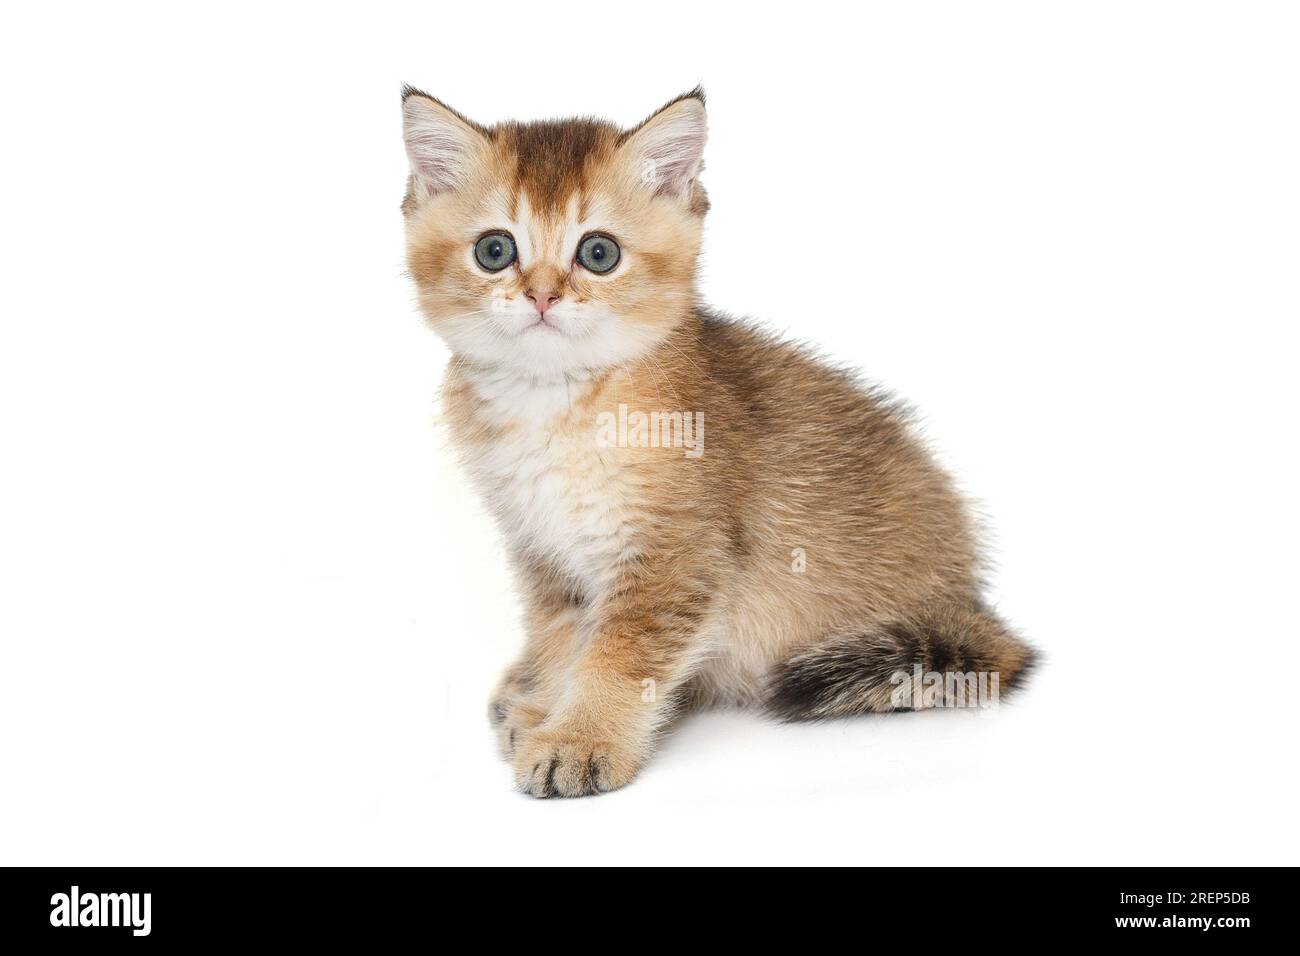 Small, funny Scottish kitten, isolated on a white background Stock Photo